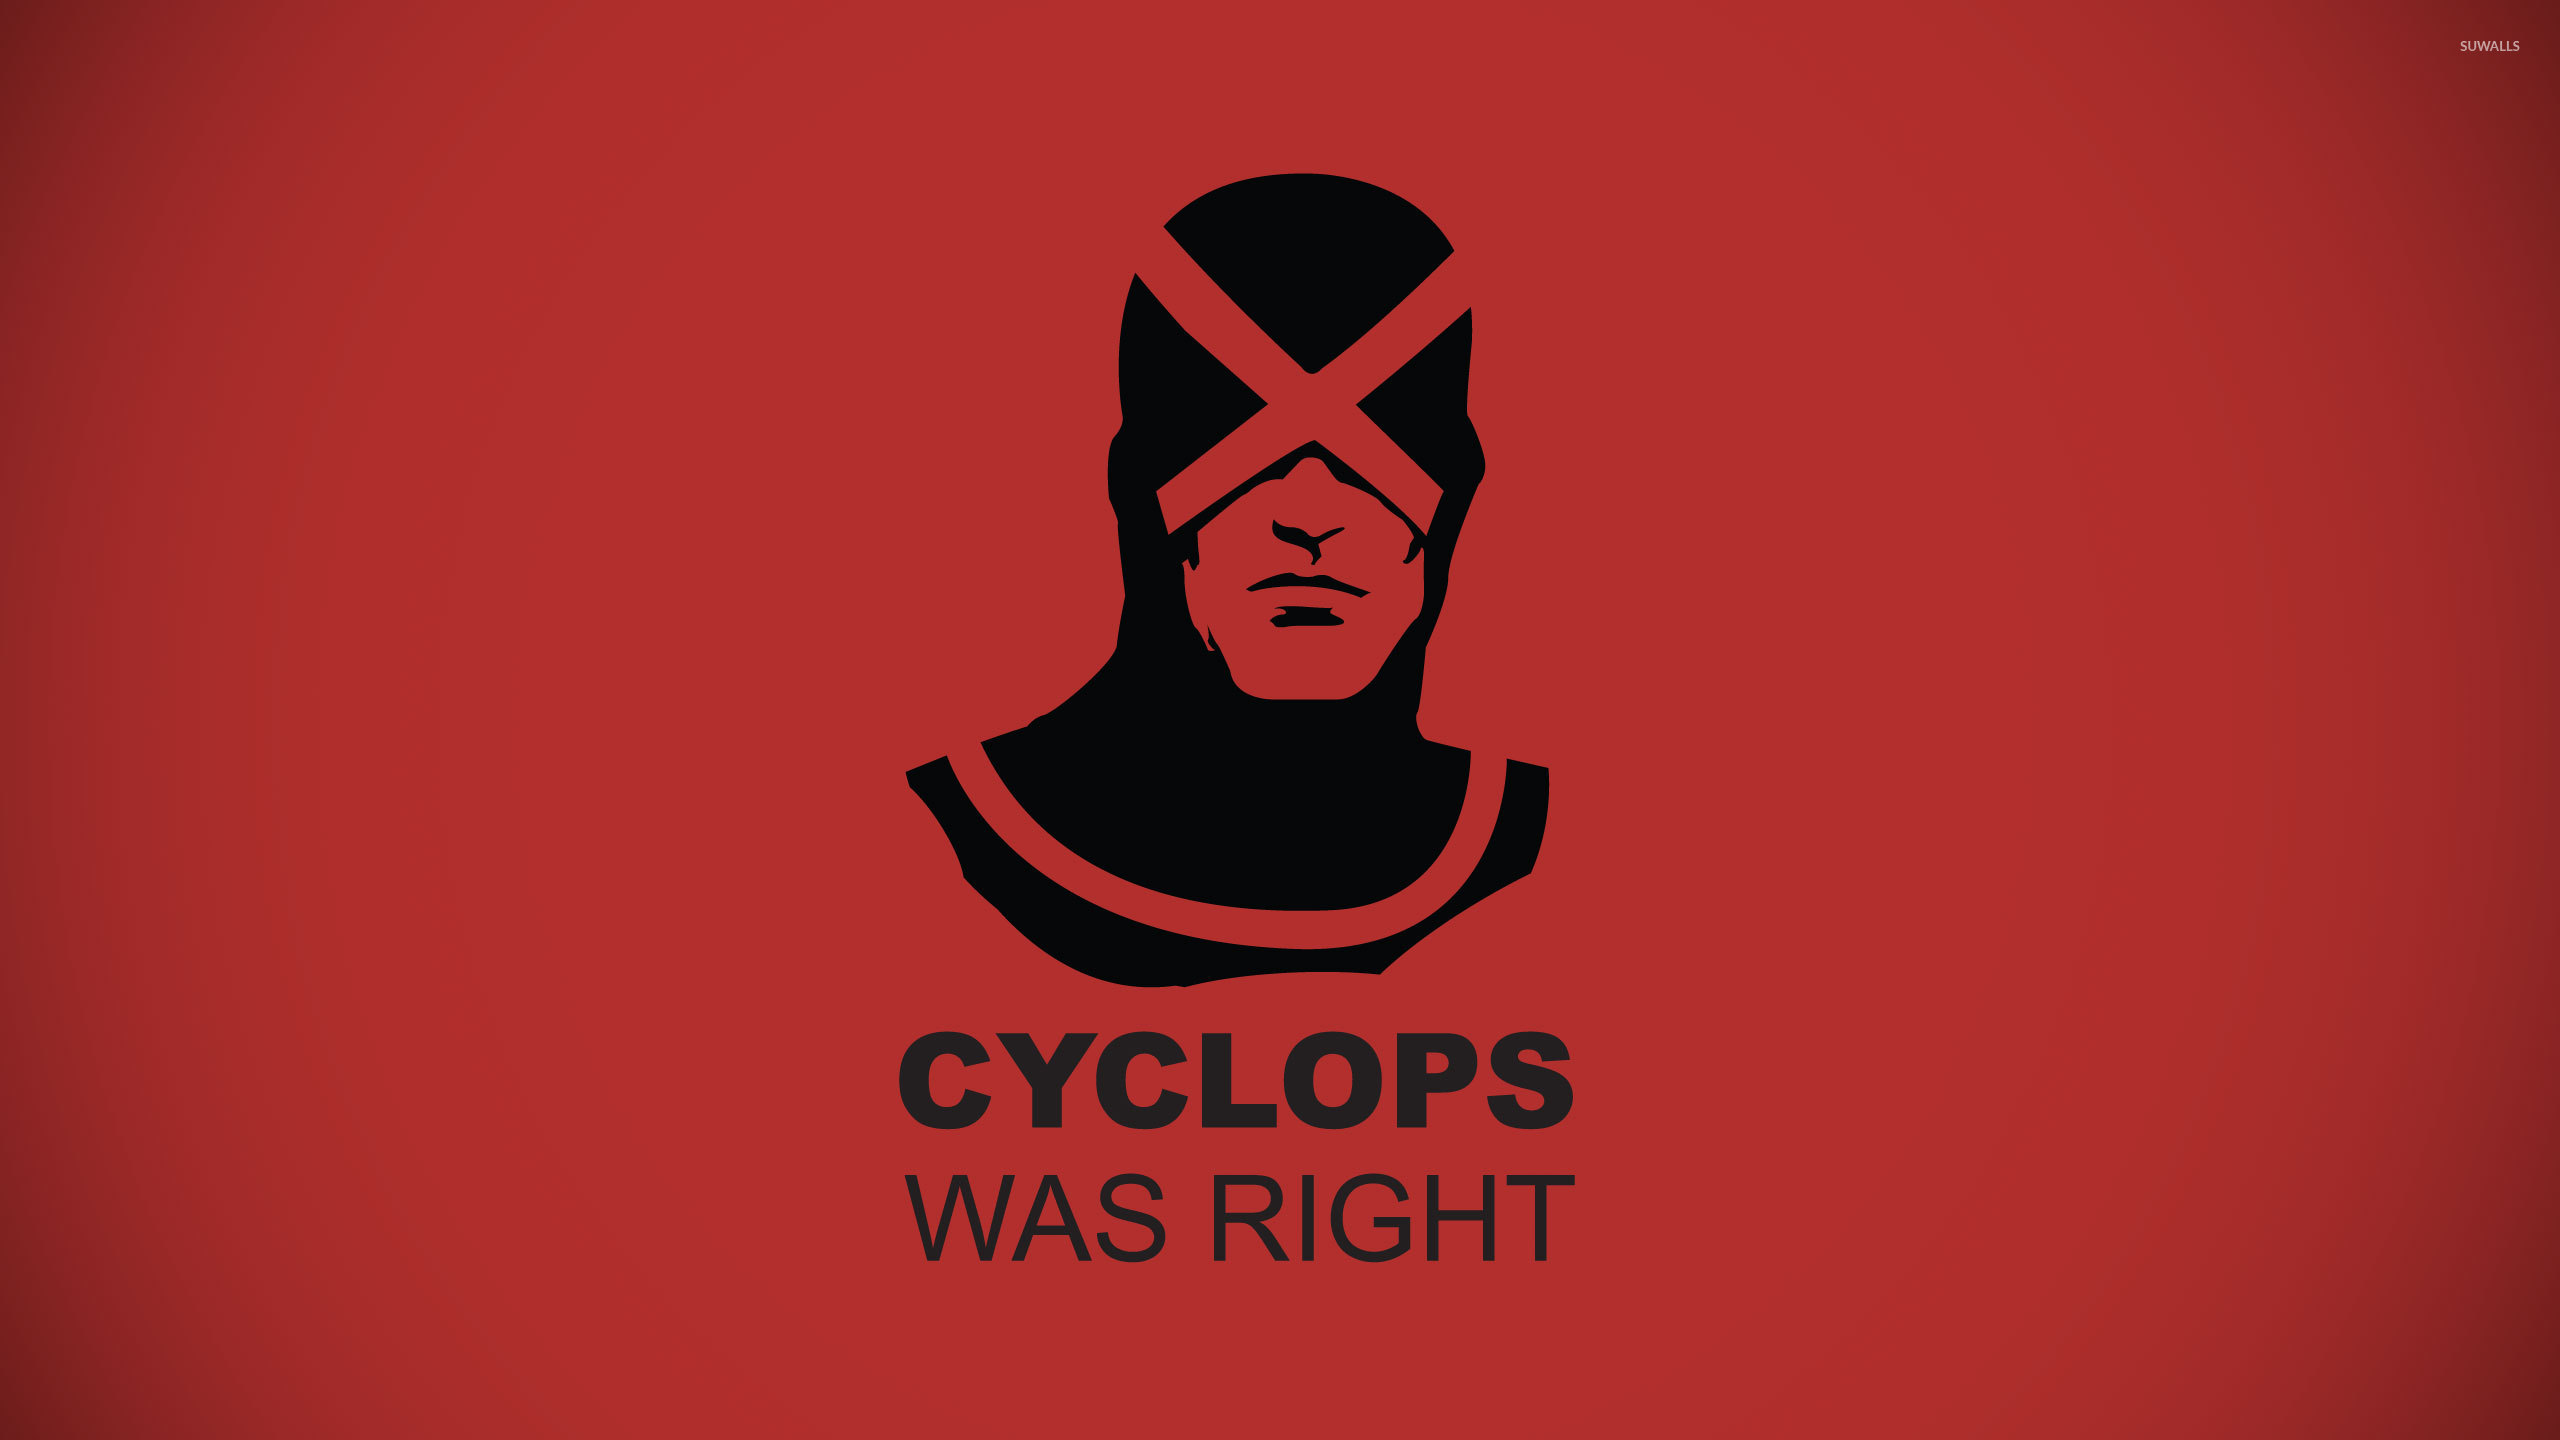 Cyclops was right